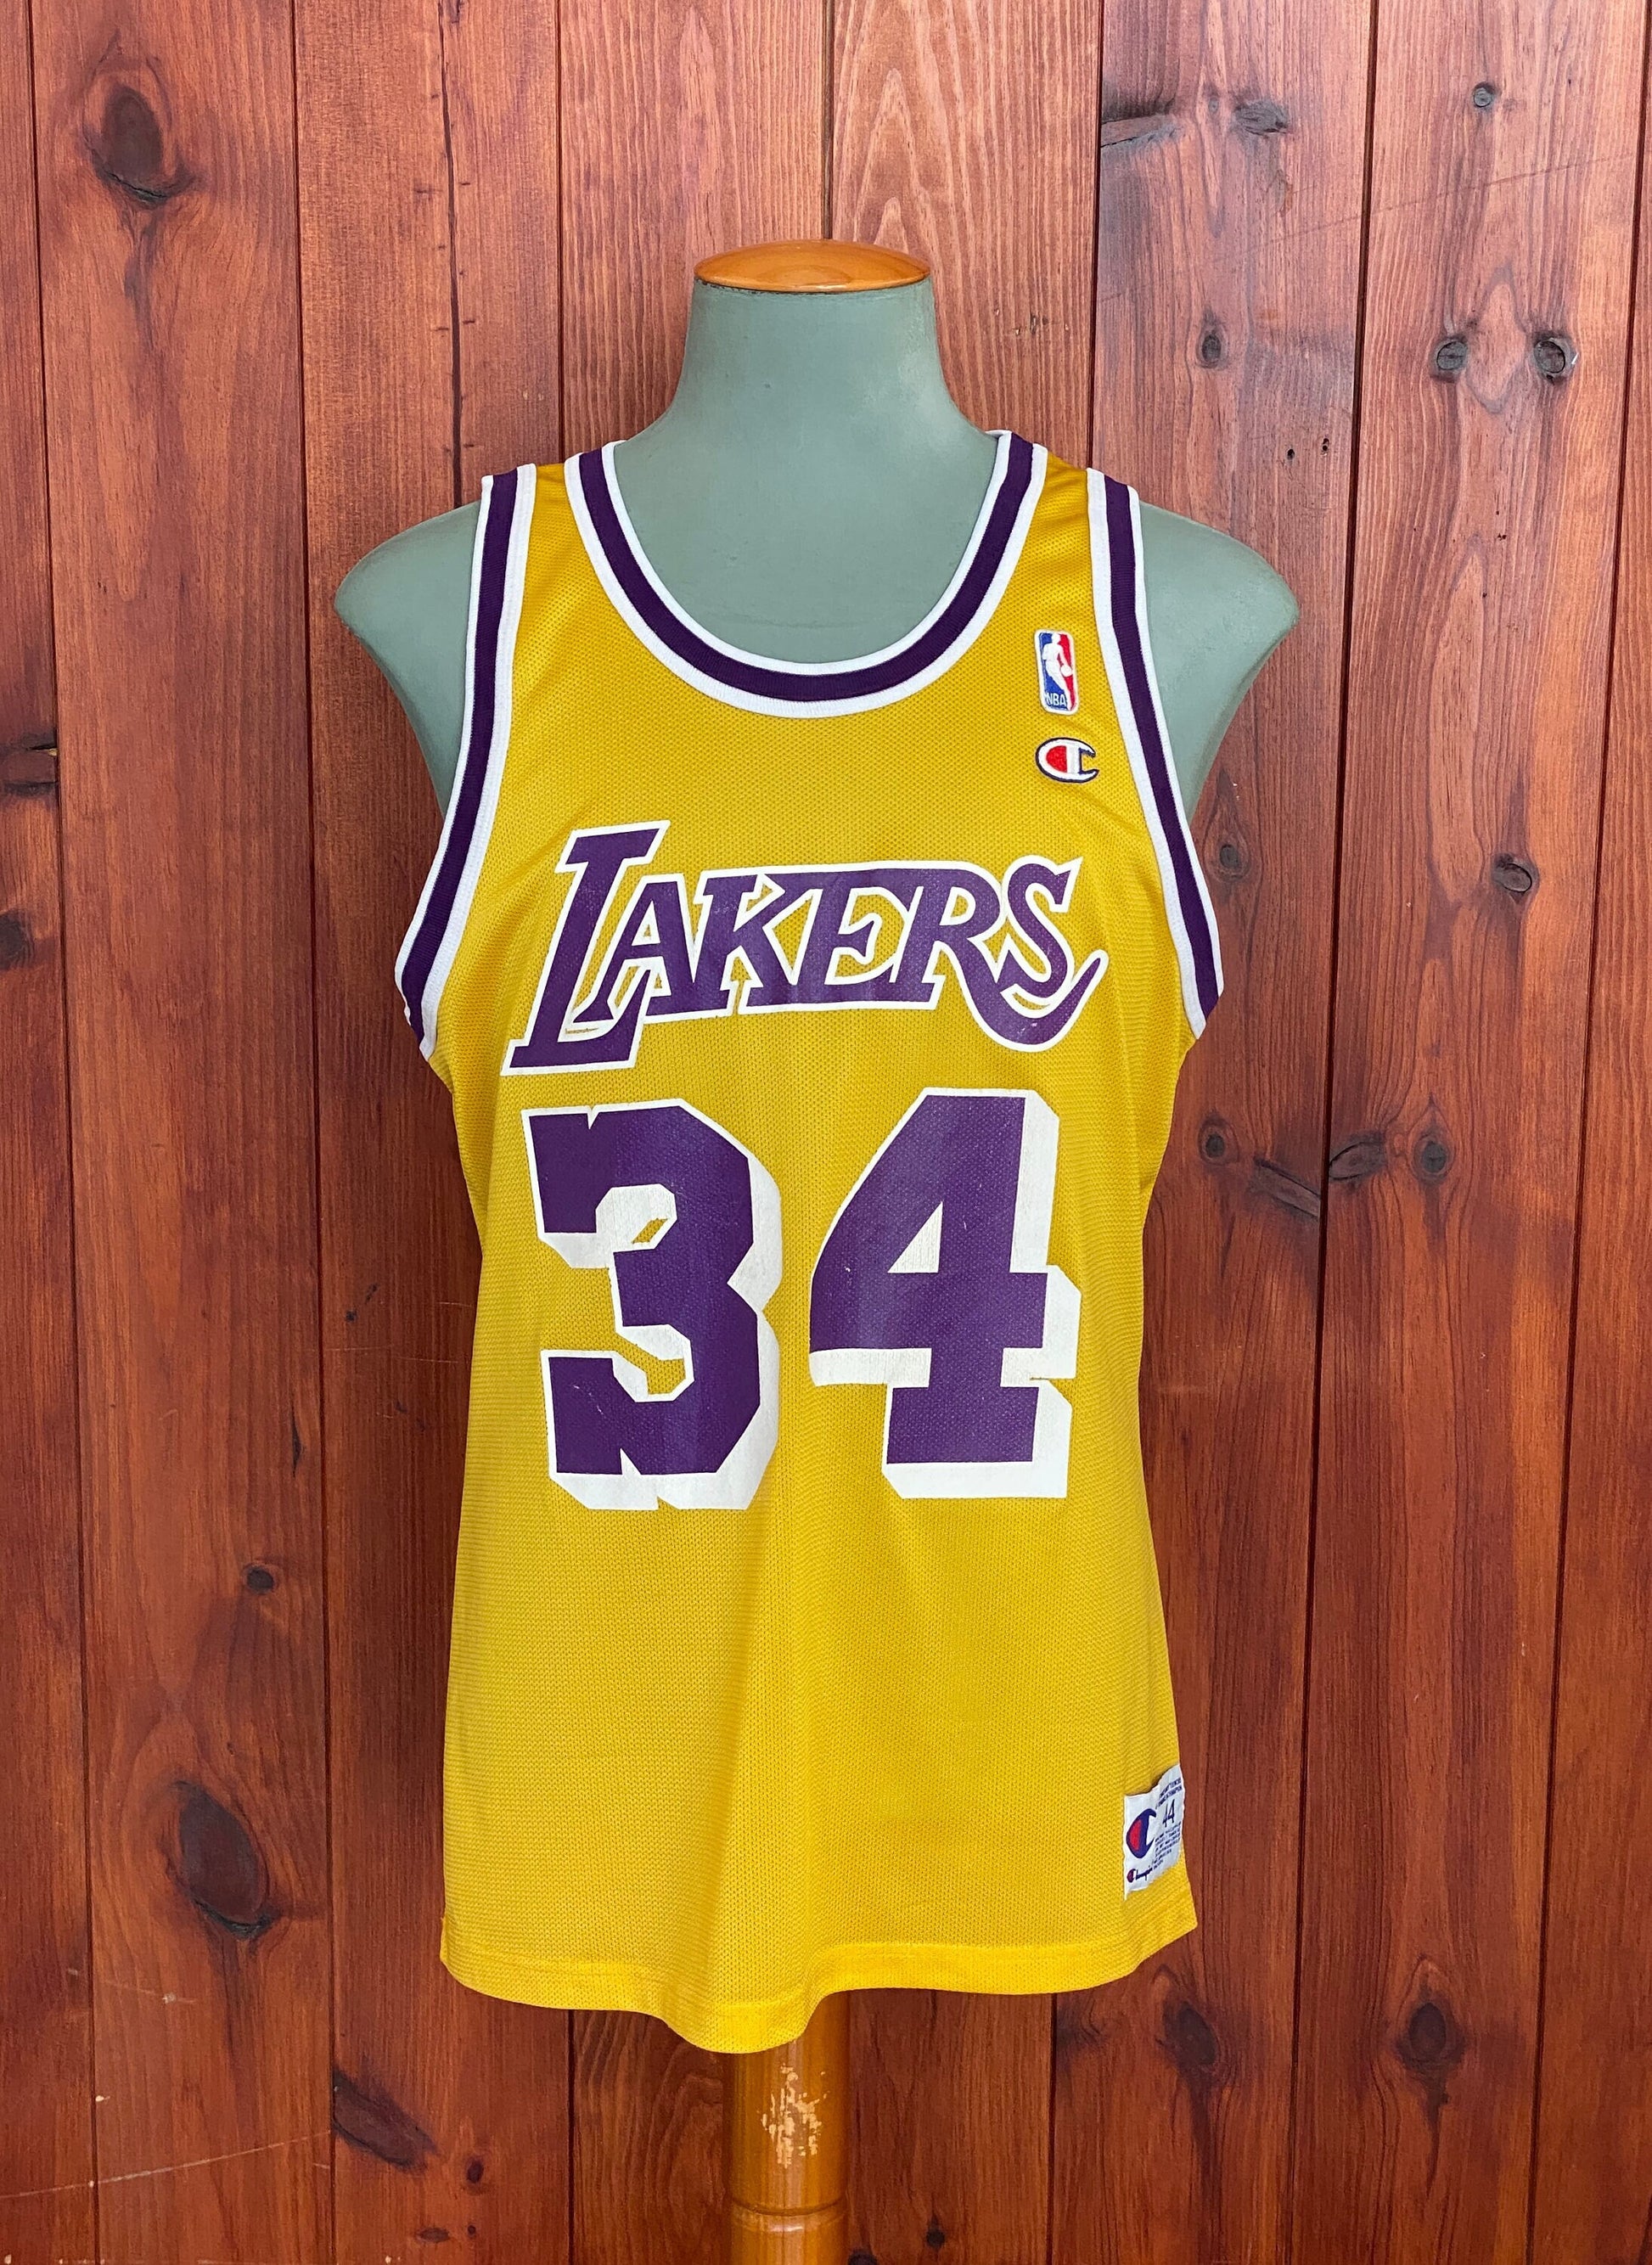 Vintage NBA Champion jersey LA Lakers with player O'Neal #34, size 44 - front view.